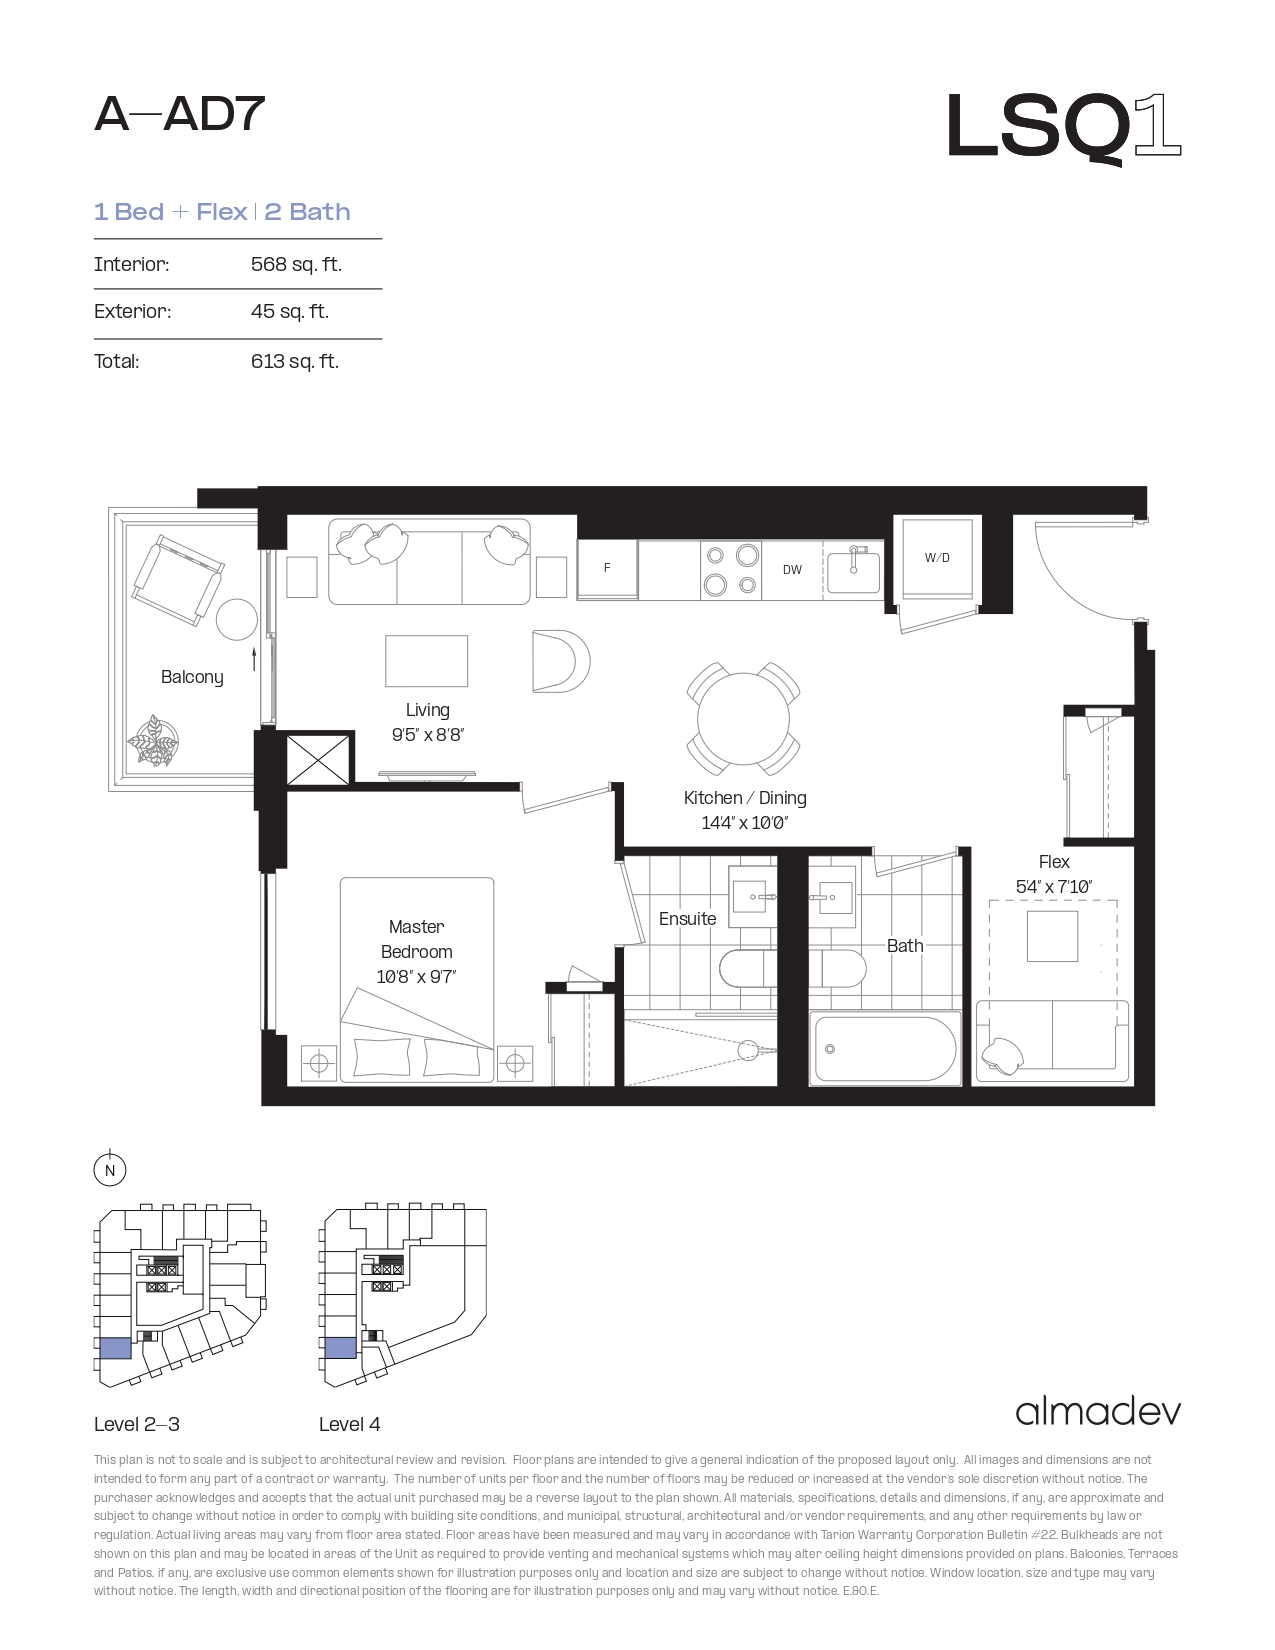 A-AD7 Floor Plan of LSQ Condos with undefined beds